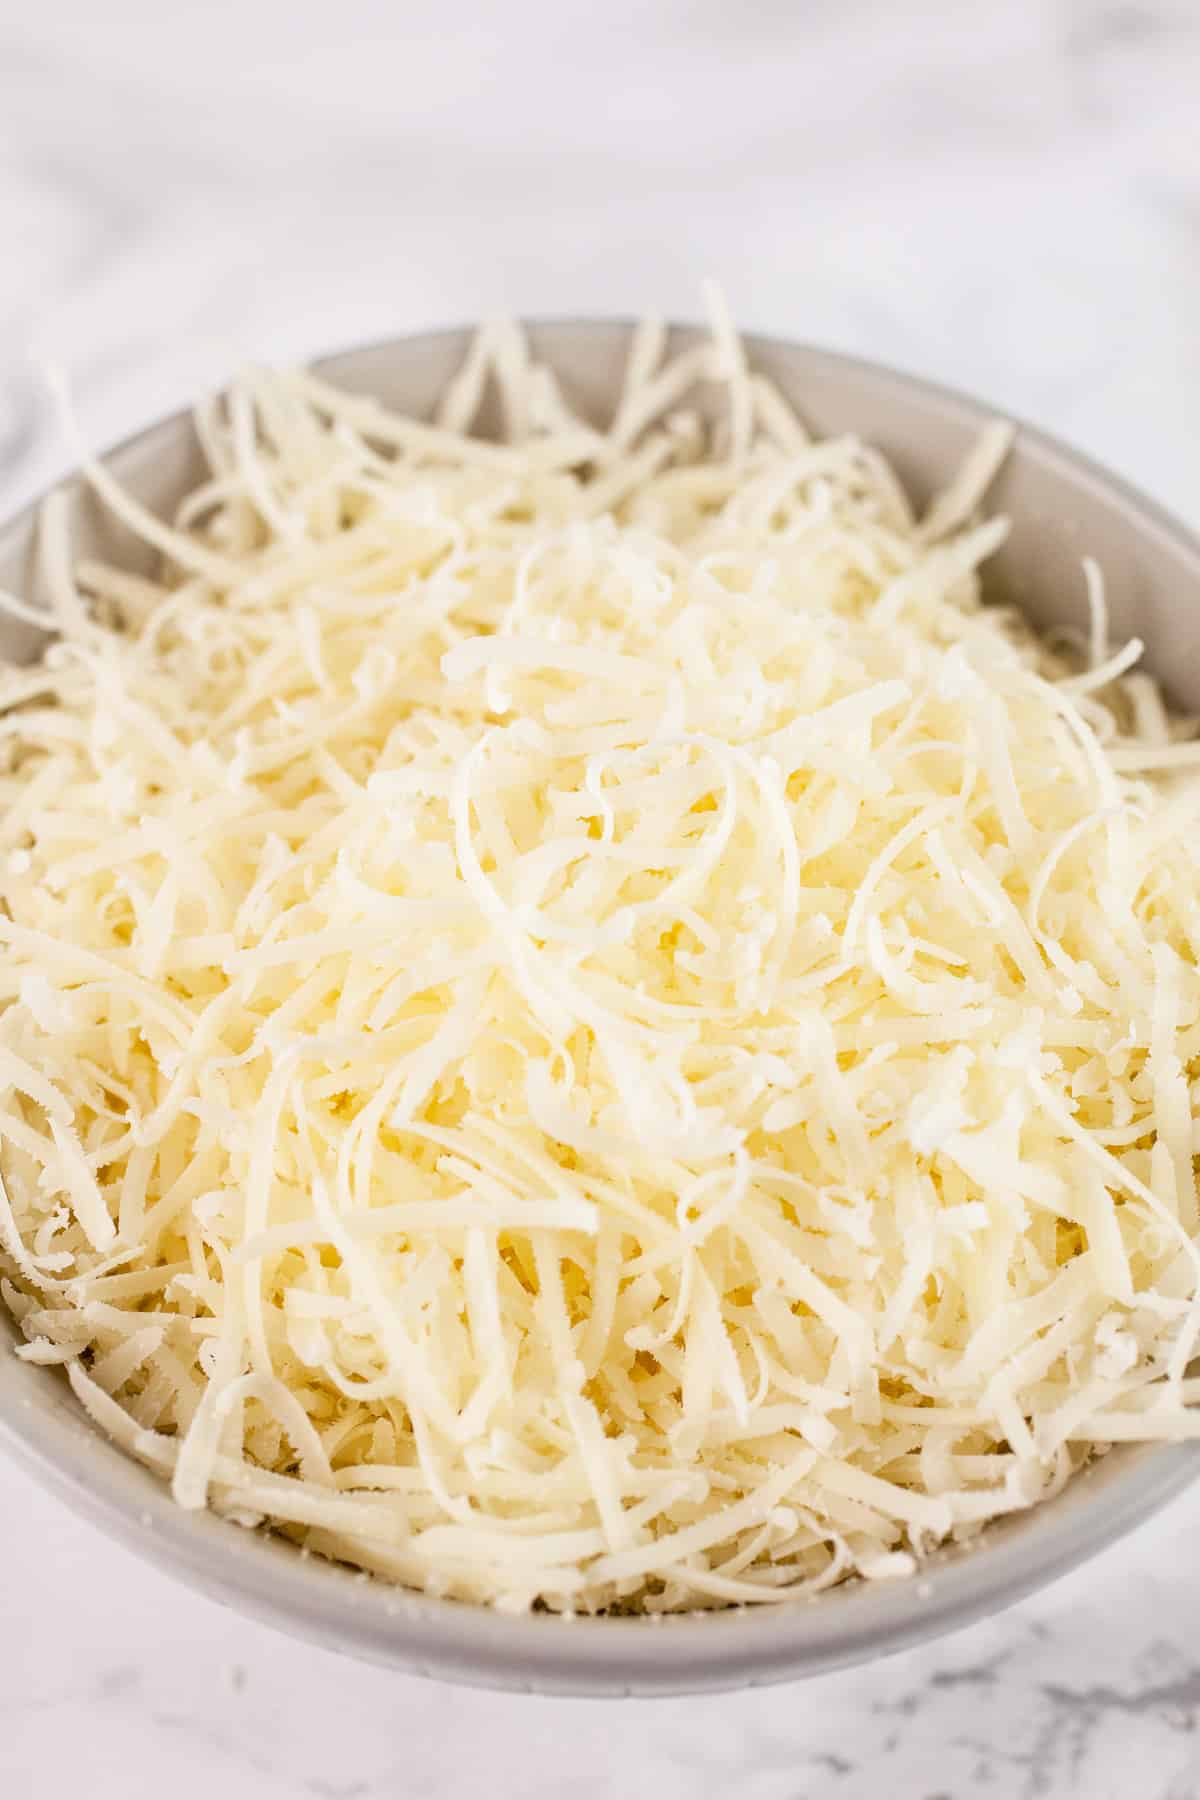 Shredded Parmesan cheese in small grey bowl on white surface.